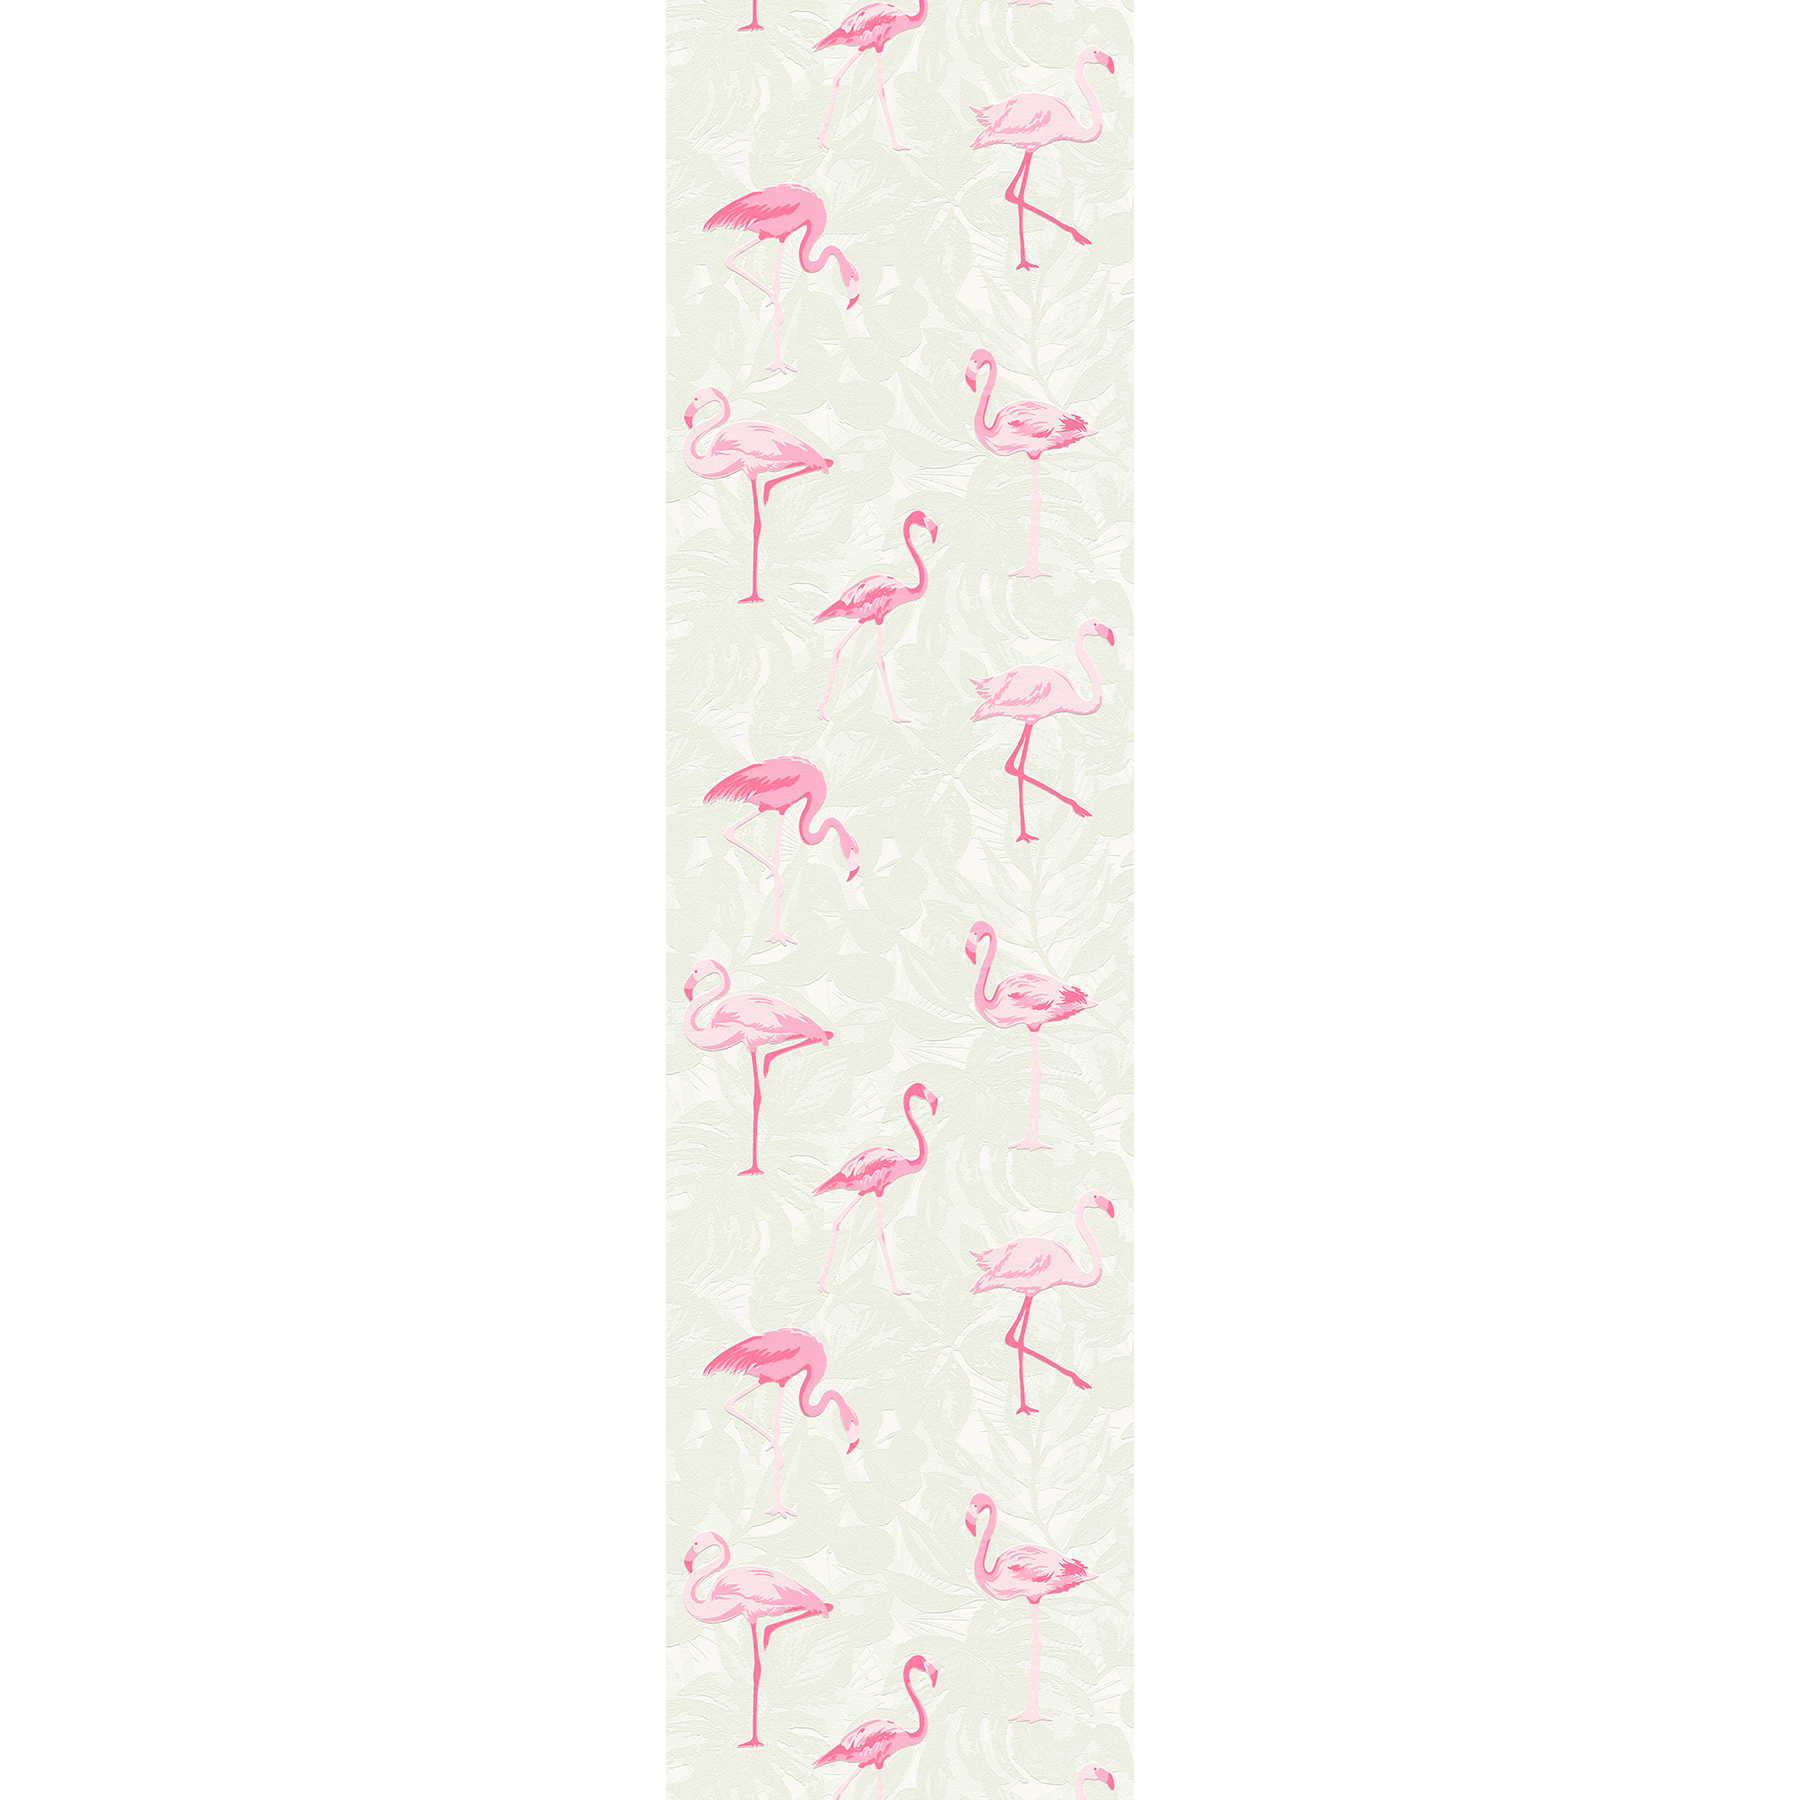         Flamingo wallpaper with texture design & leaves pattern - cream, pink
    